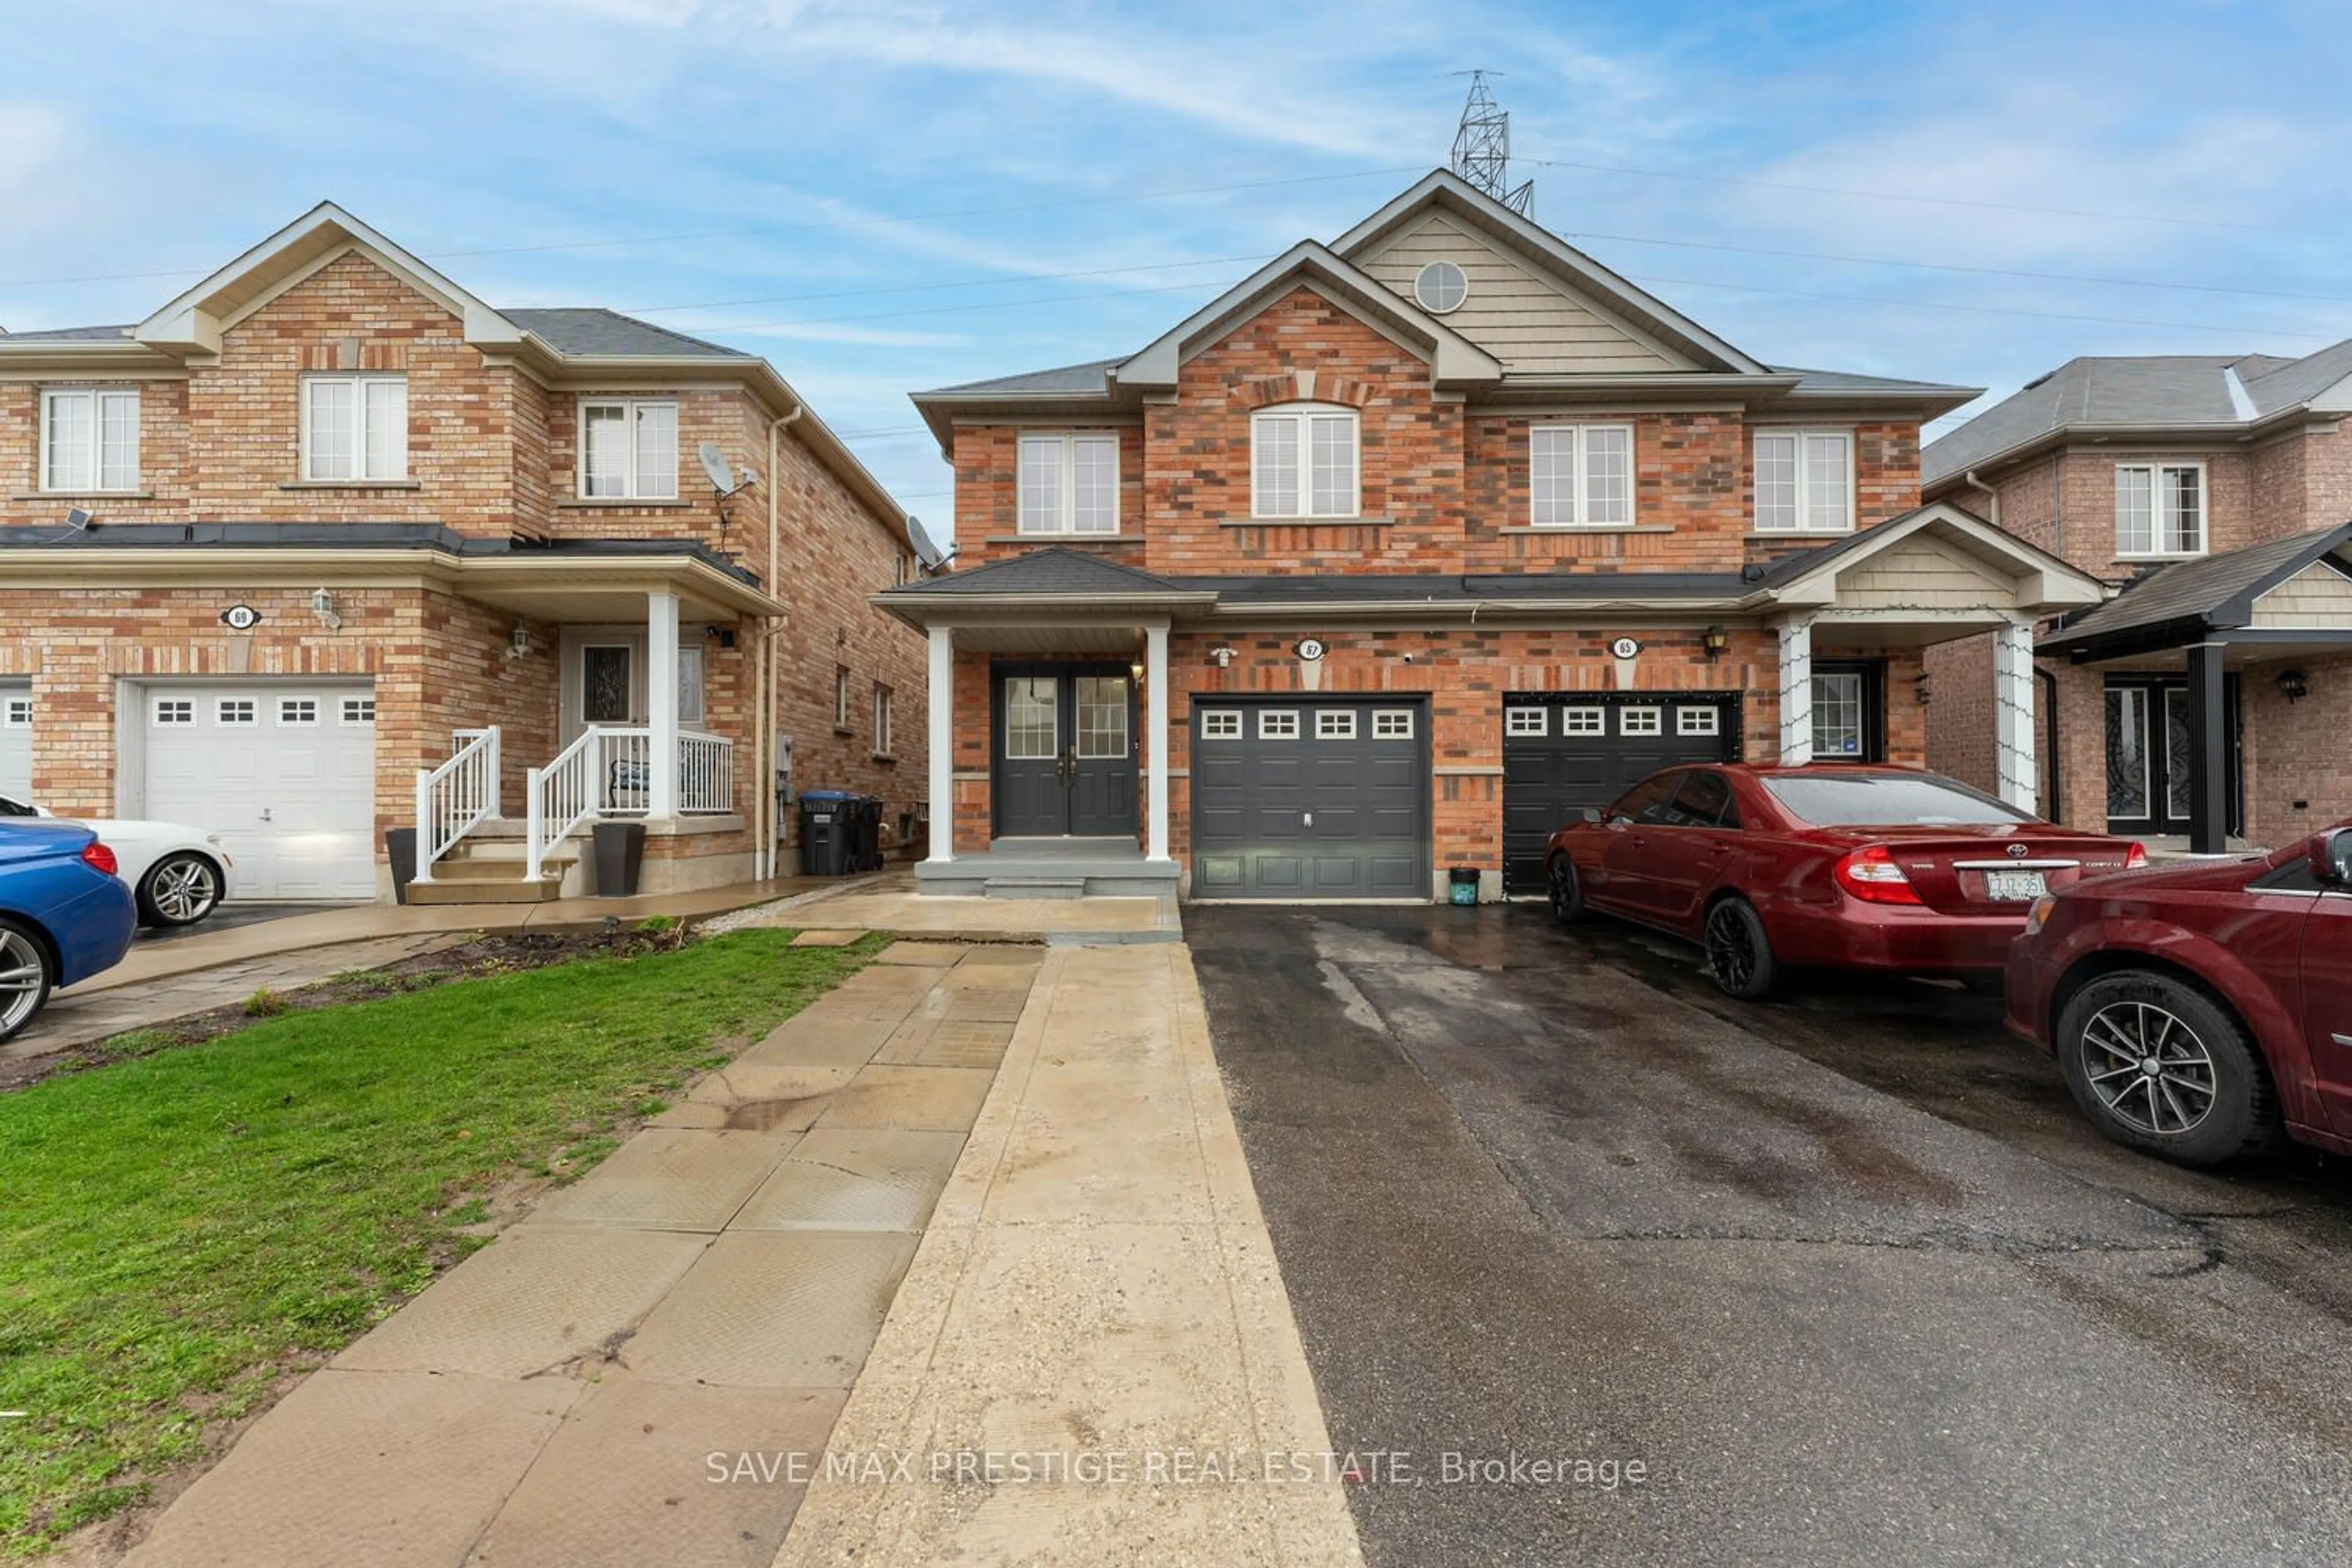 Home with brick exterior material for 67 Roundstone Dr, Brampton Ontario L6X 0K4